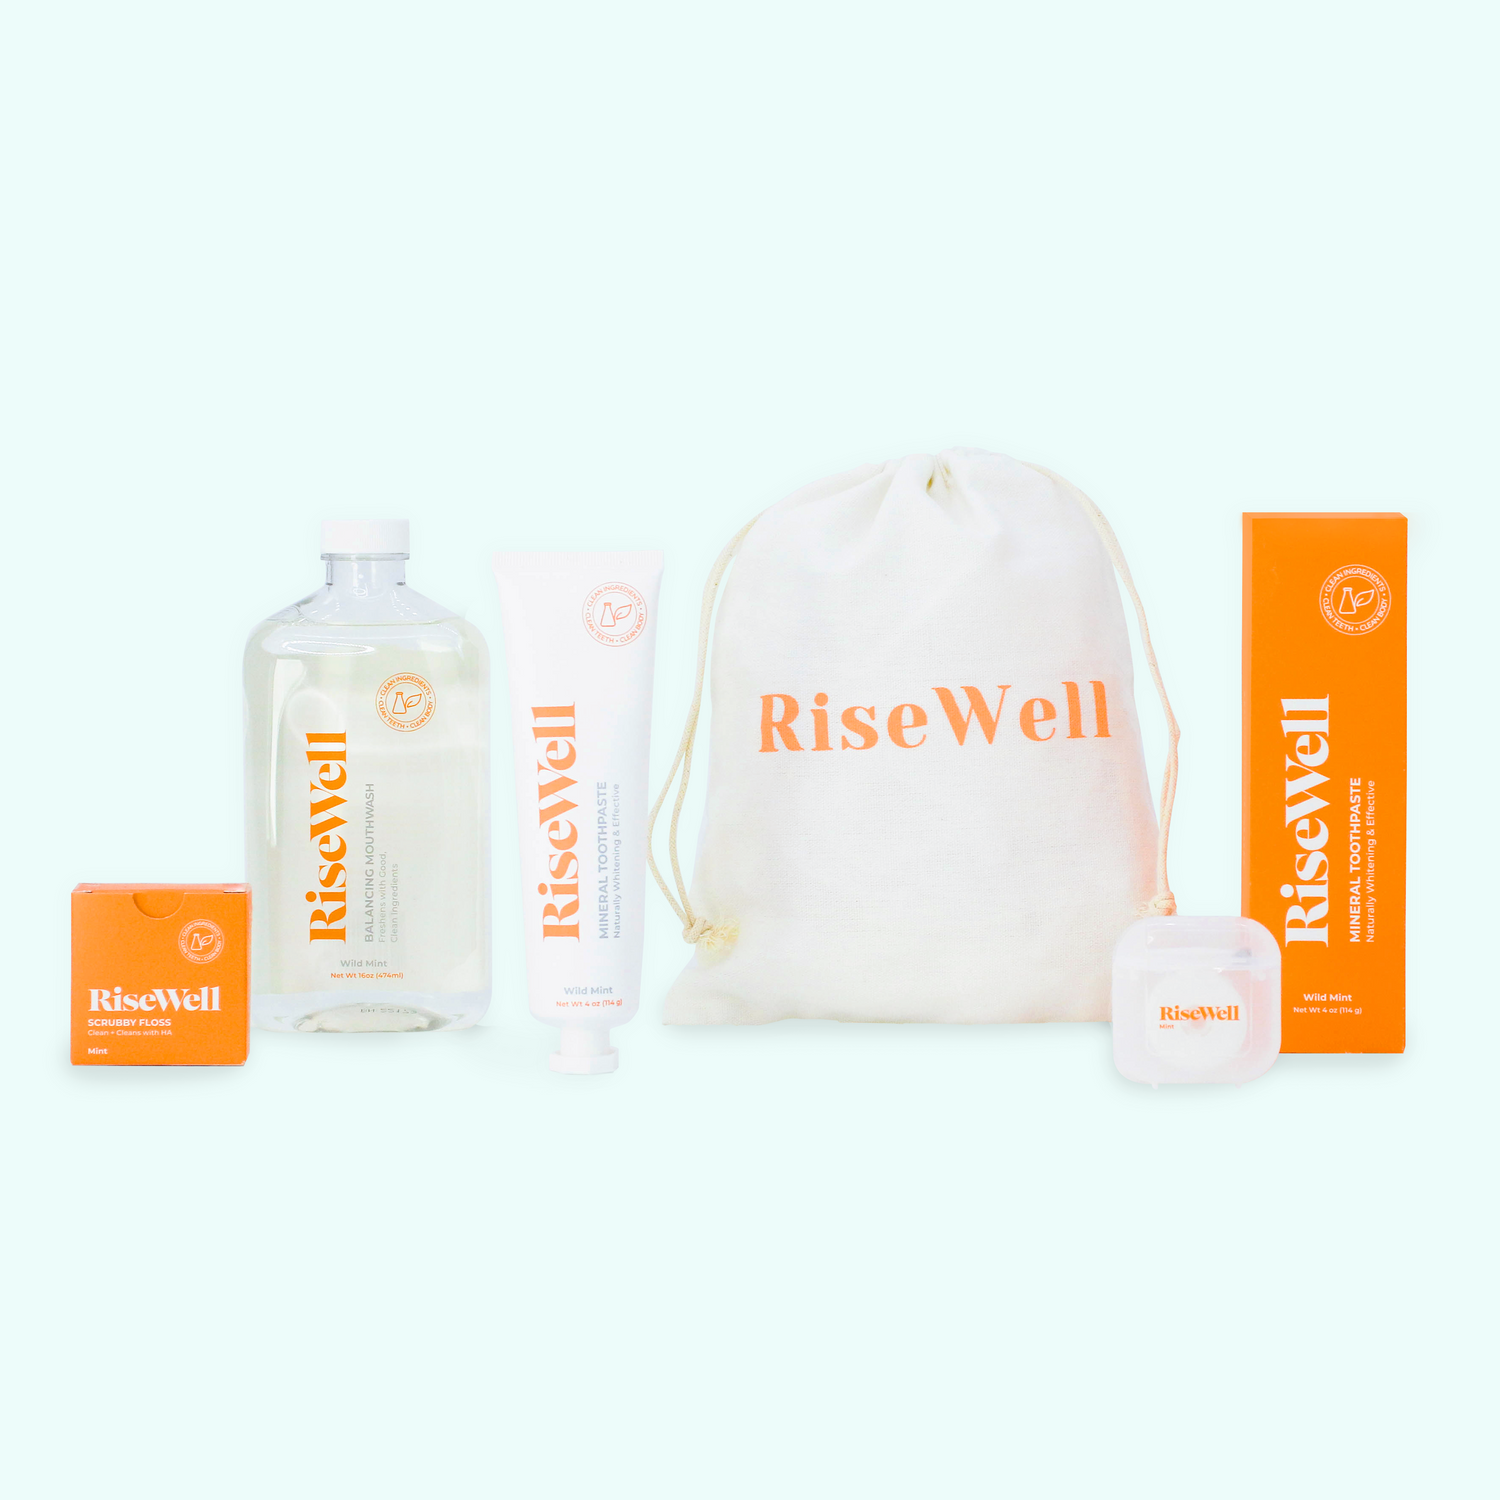 https://cdn.shopify.com/s/files/1/0030/3900/2687/products/RiseWell-FullBundle_Blue_1_1500x.png?v=1680267503